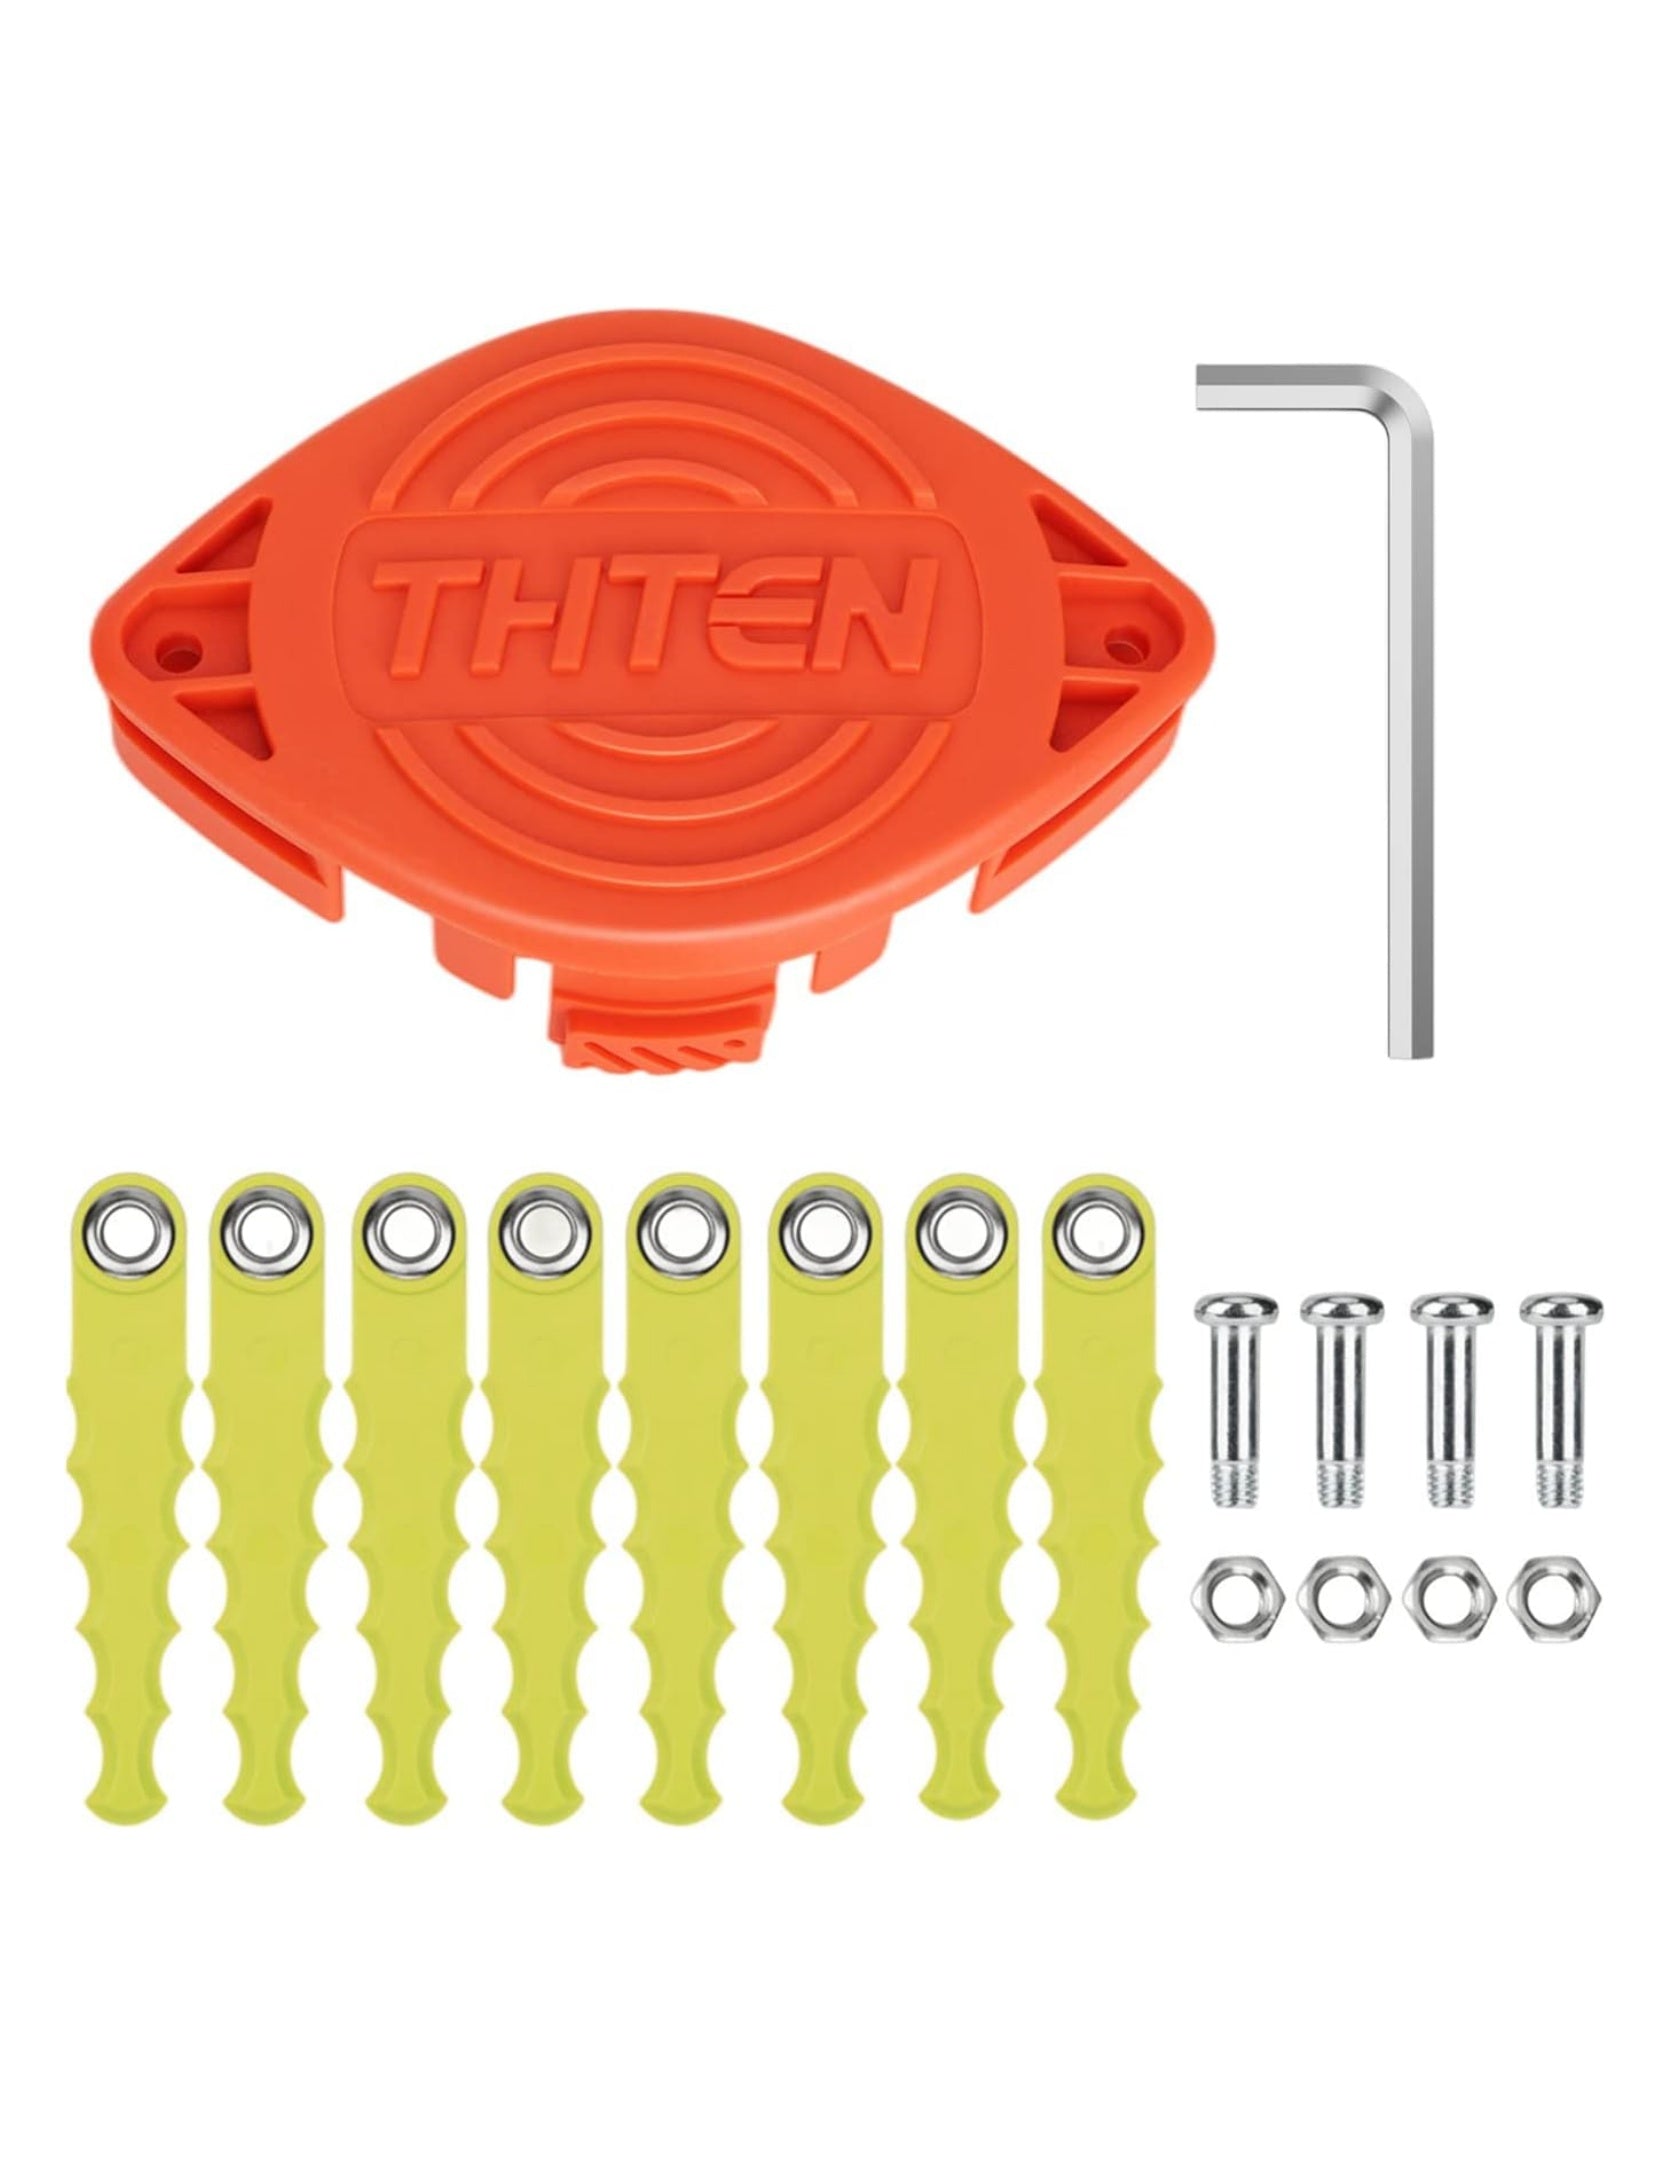 THTEN AF-100 Trimmer Blades Head Compatible with Black & Decker GH600,GH610,GH900,GH912,ST6600,ST7000,ST7700,NST1118,NST2118,LST220,LST300,LST400,LST420 Edger Grass Trimmers 18 Pack